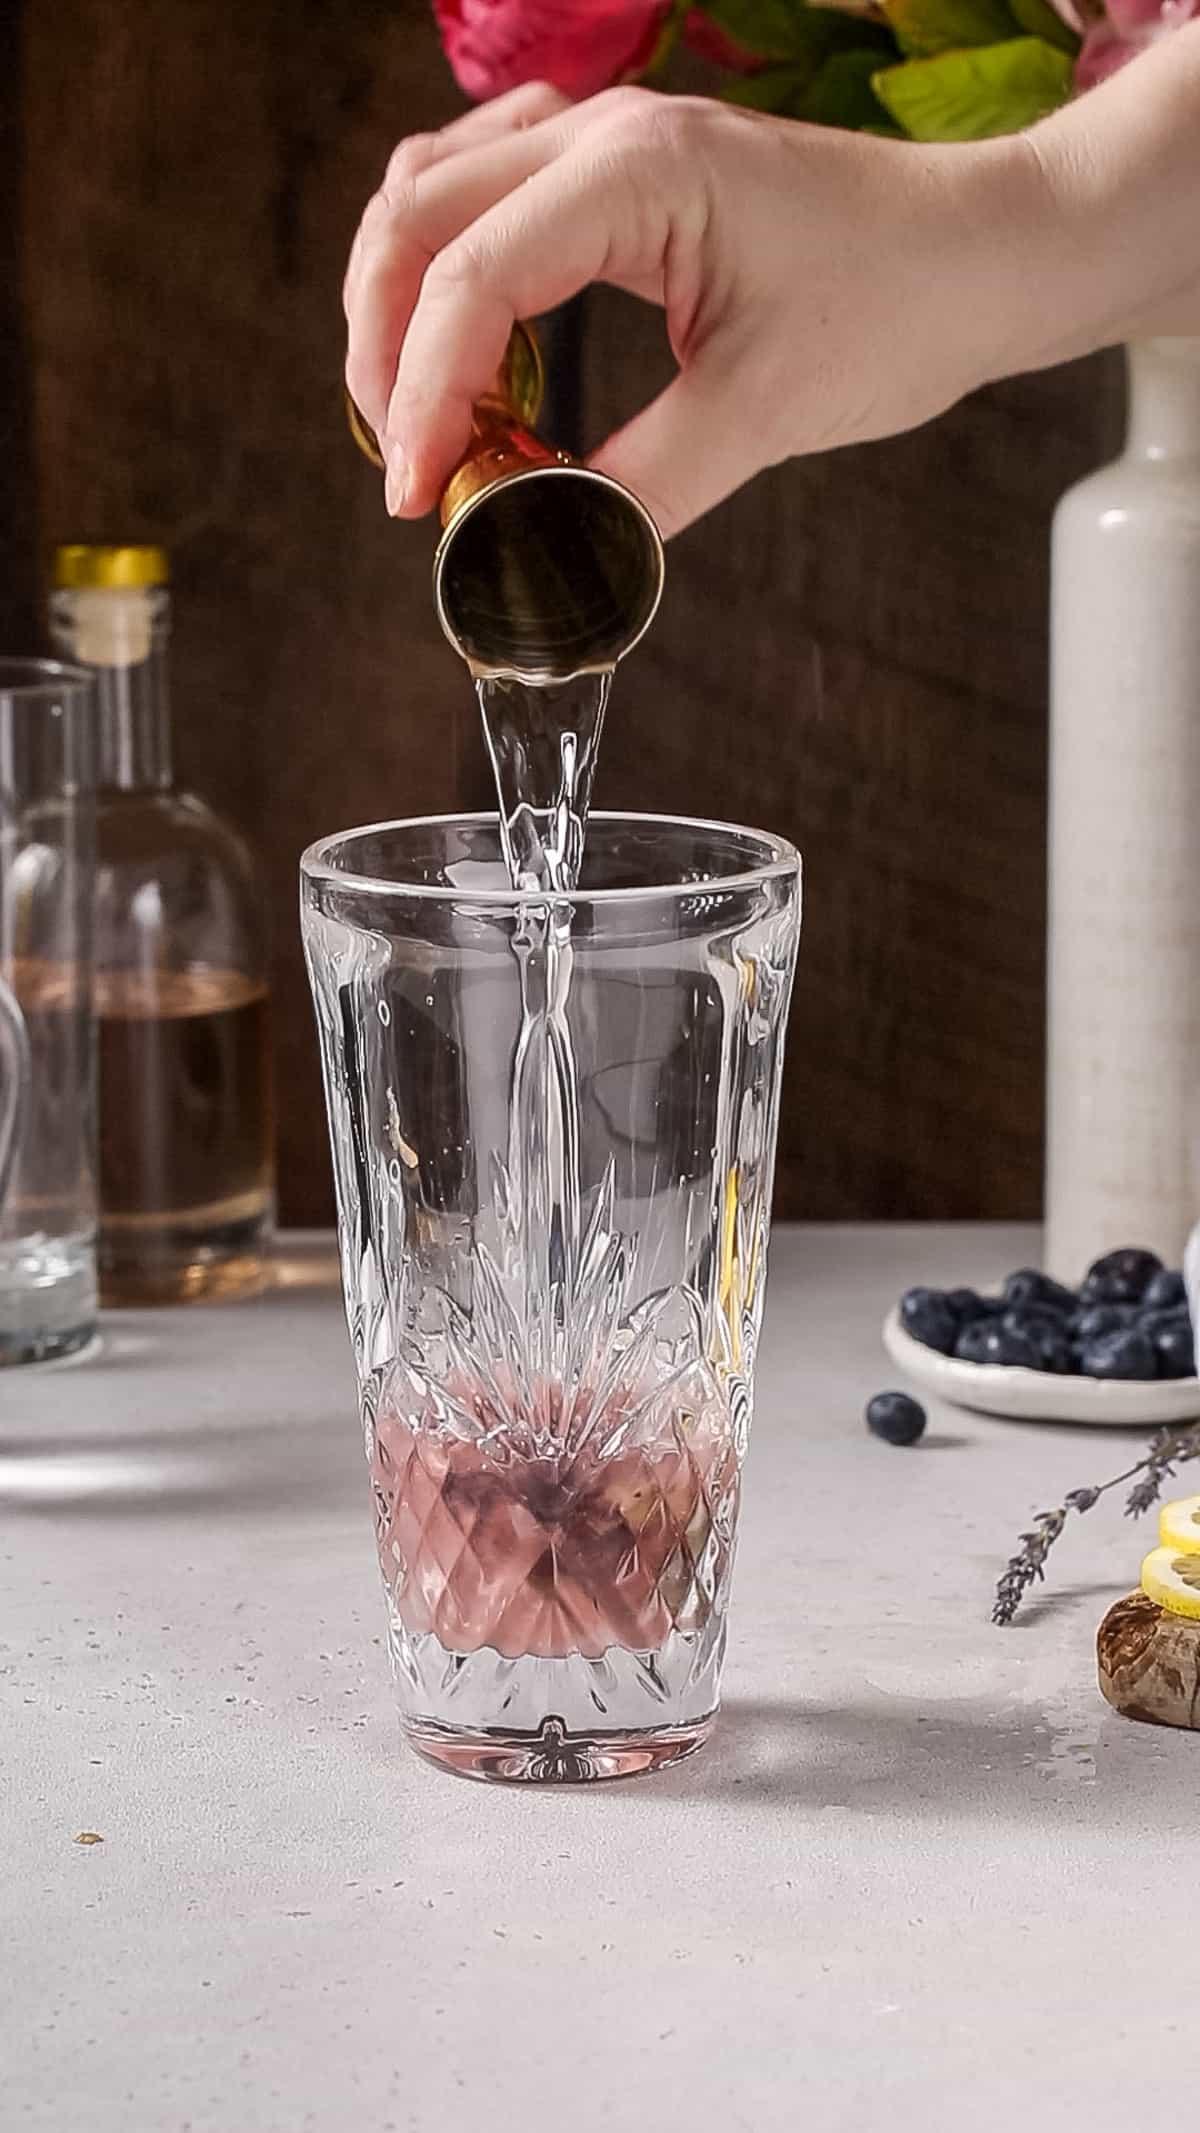 Hand pouring water into a cocktail shaker.